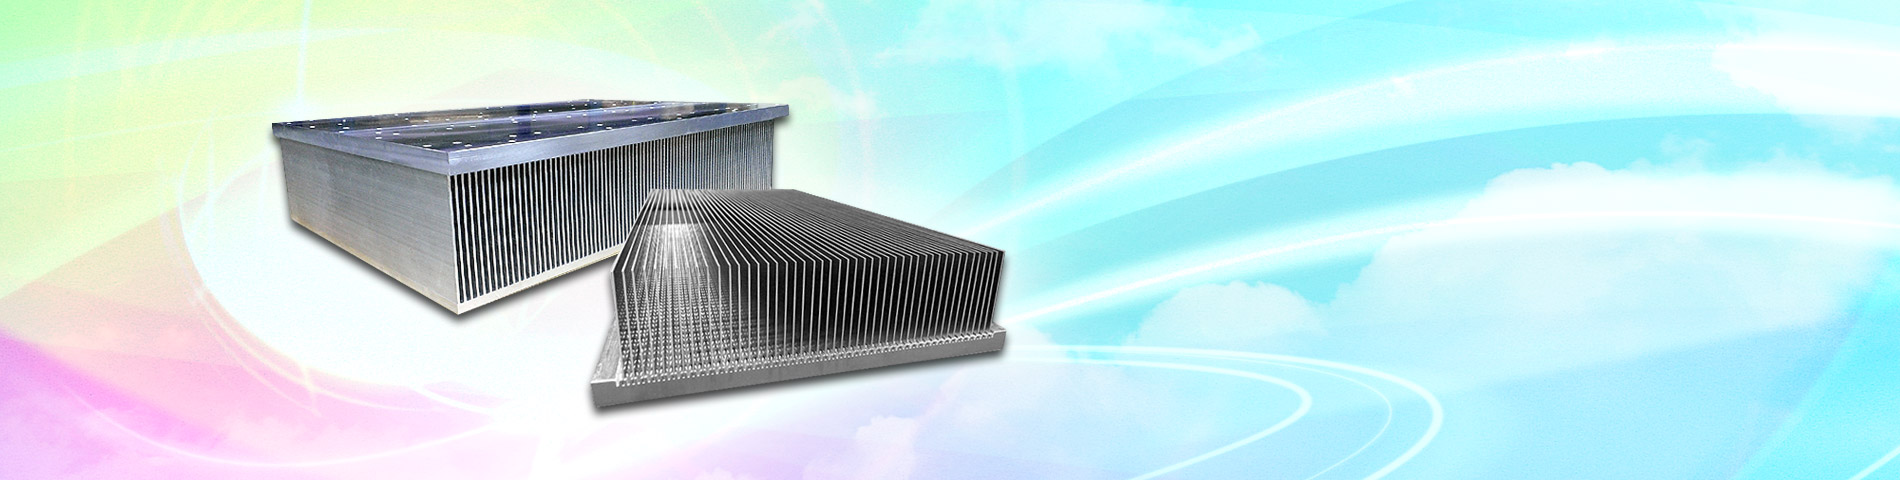 SHUNTEH We Satisfy Your Need A professional manufacturer of HEAT SINK